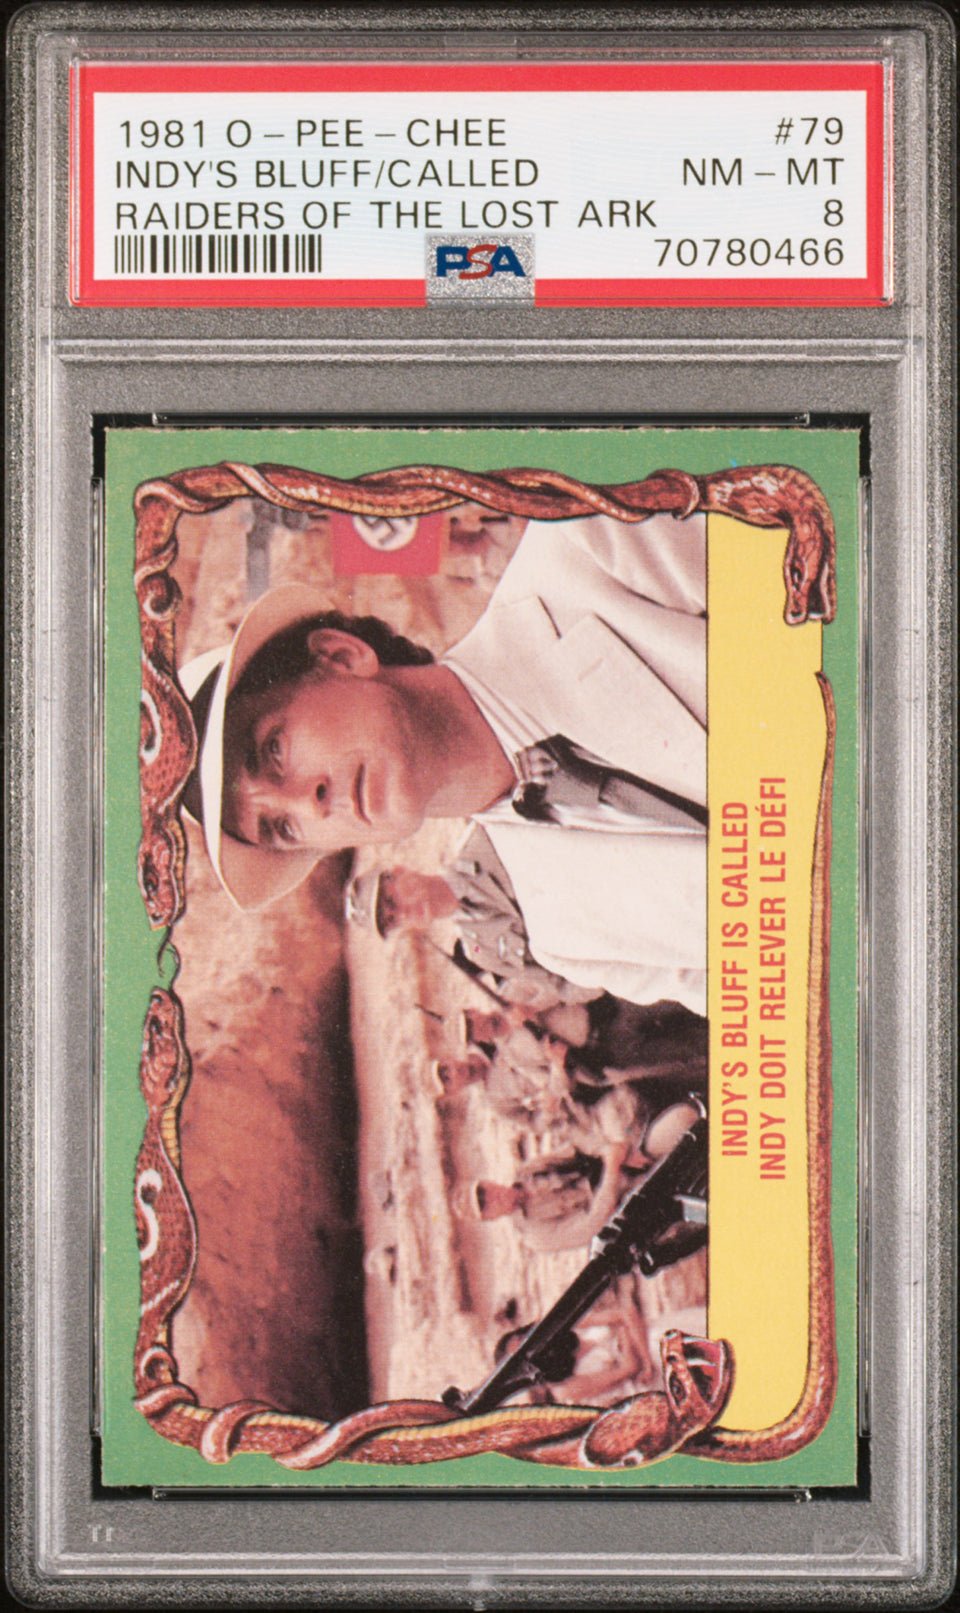 INDY'S BLUFF IS CALLED PSA 8 1981 O-Pee-Chee Raiders of the Lost Ark #79 Indiana Jones Base Graded Cards - Hobby Gems